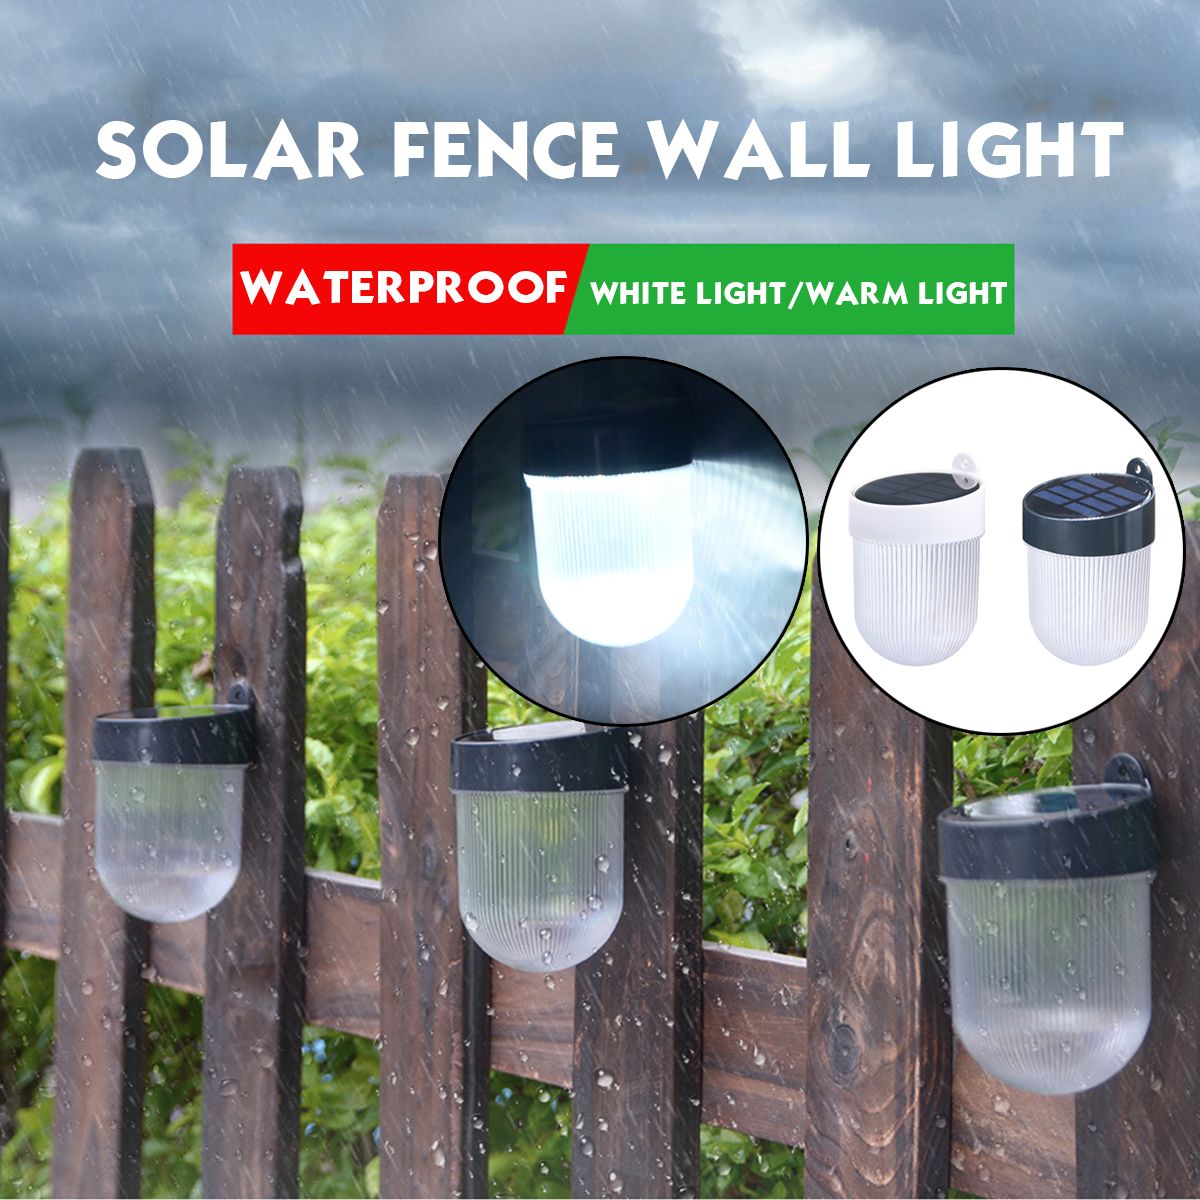 Outdoor-Solar-Powered-LED-Fence-Light-Dual-Color-Temperature-Waterproof-Wall-Lamp-Garden-Patio-Light-1721231